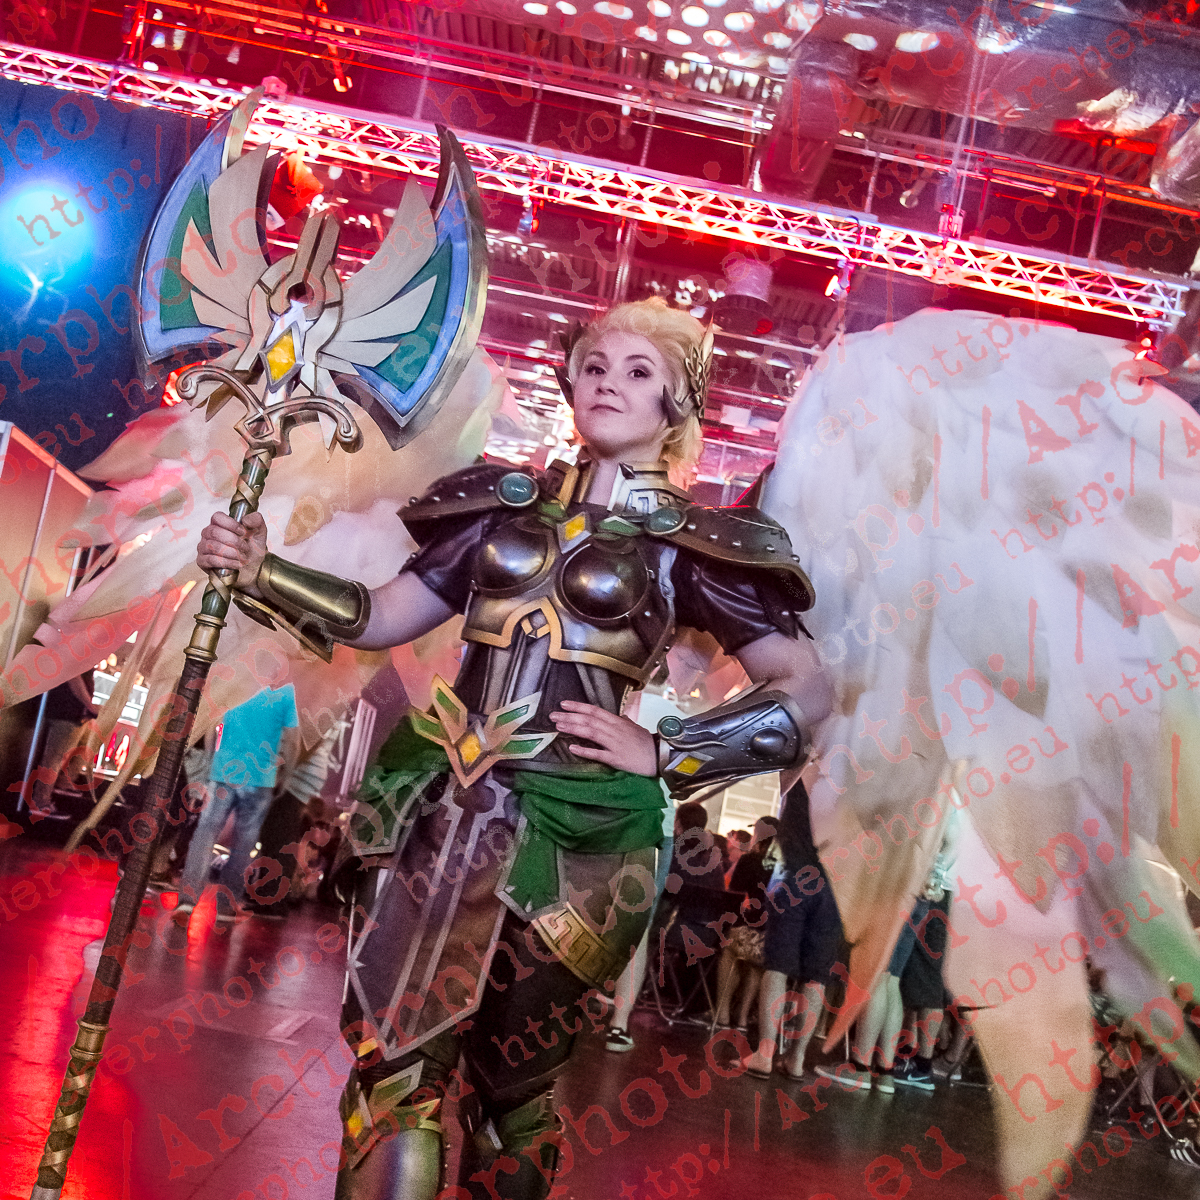 Cosplayer in Dreamhack Valencia 2017, July 15th 2017